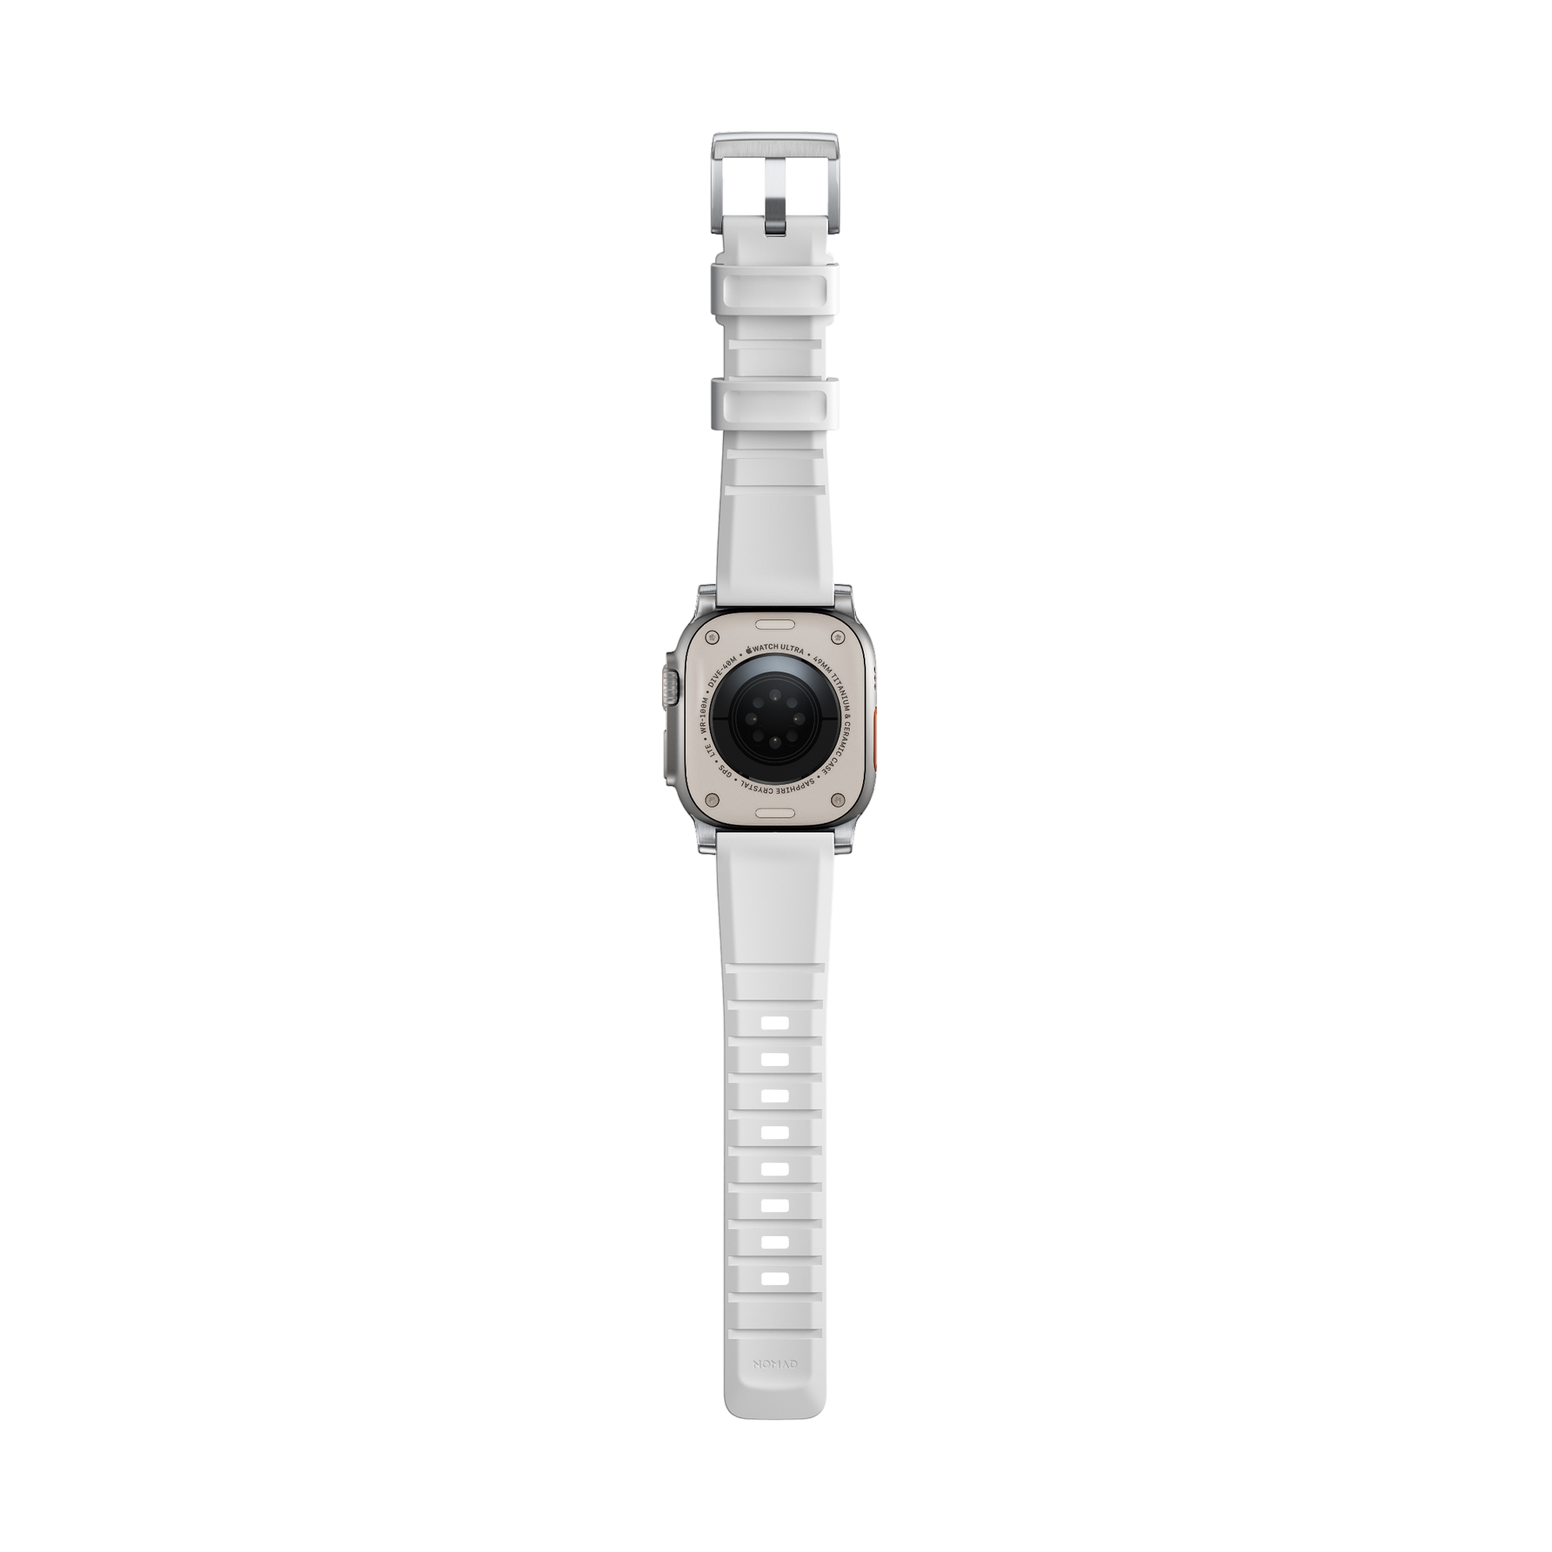 Nomad Rugged Band - 45/49mm - White - Silver Hardware - Limited Edition - Exclusive to MegaMac